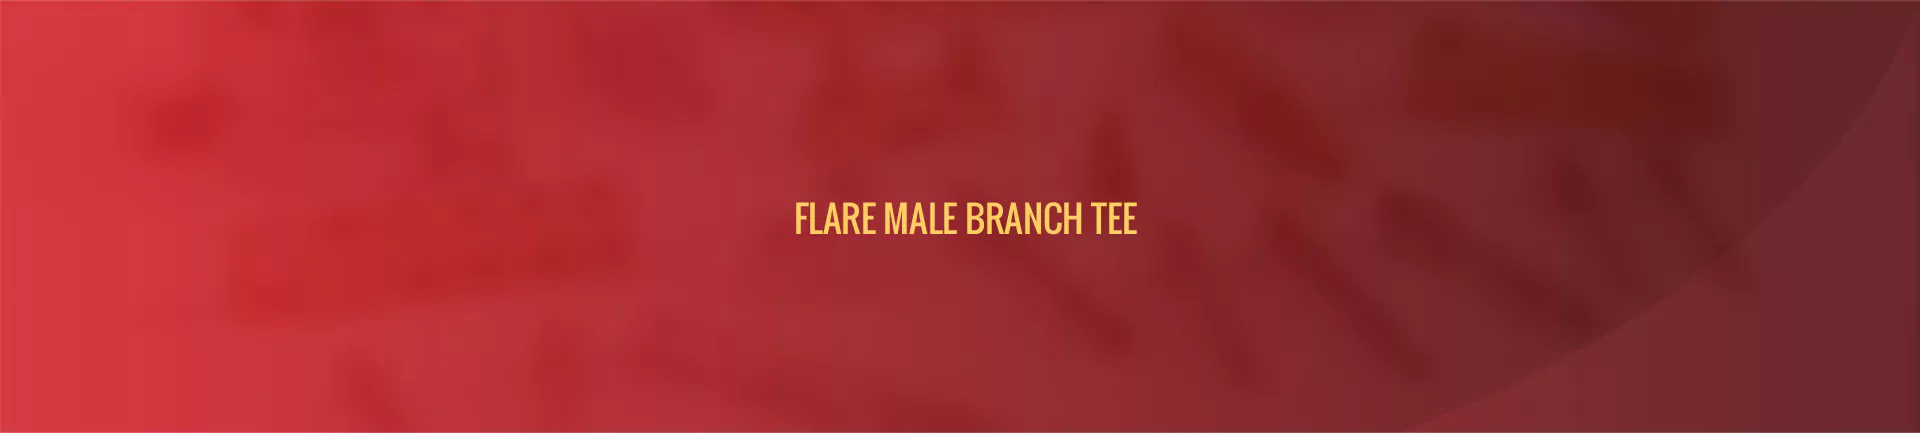 flare-male-branch-tee-banner